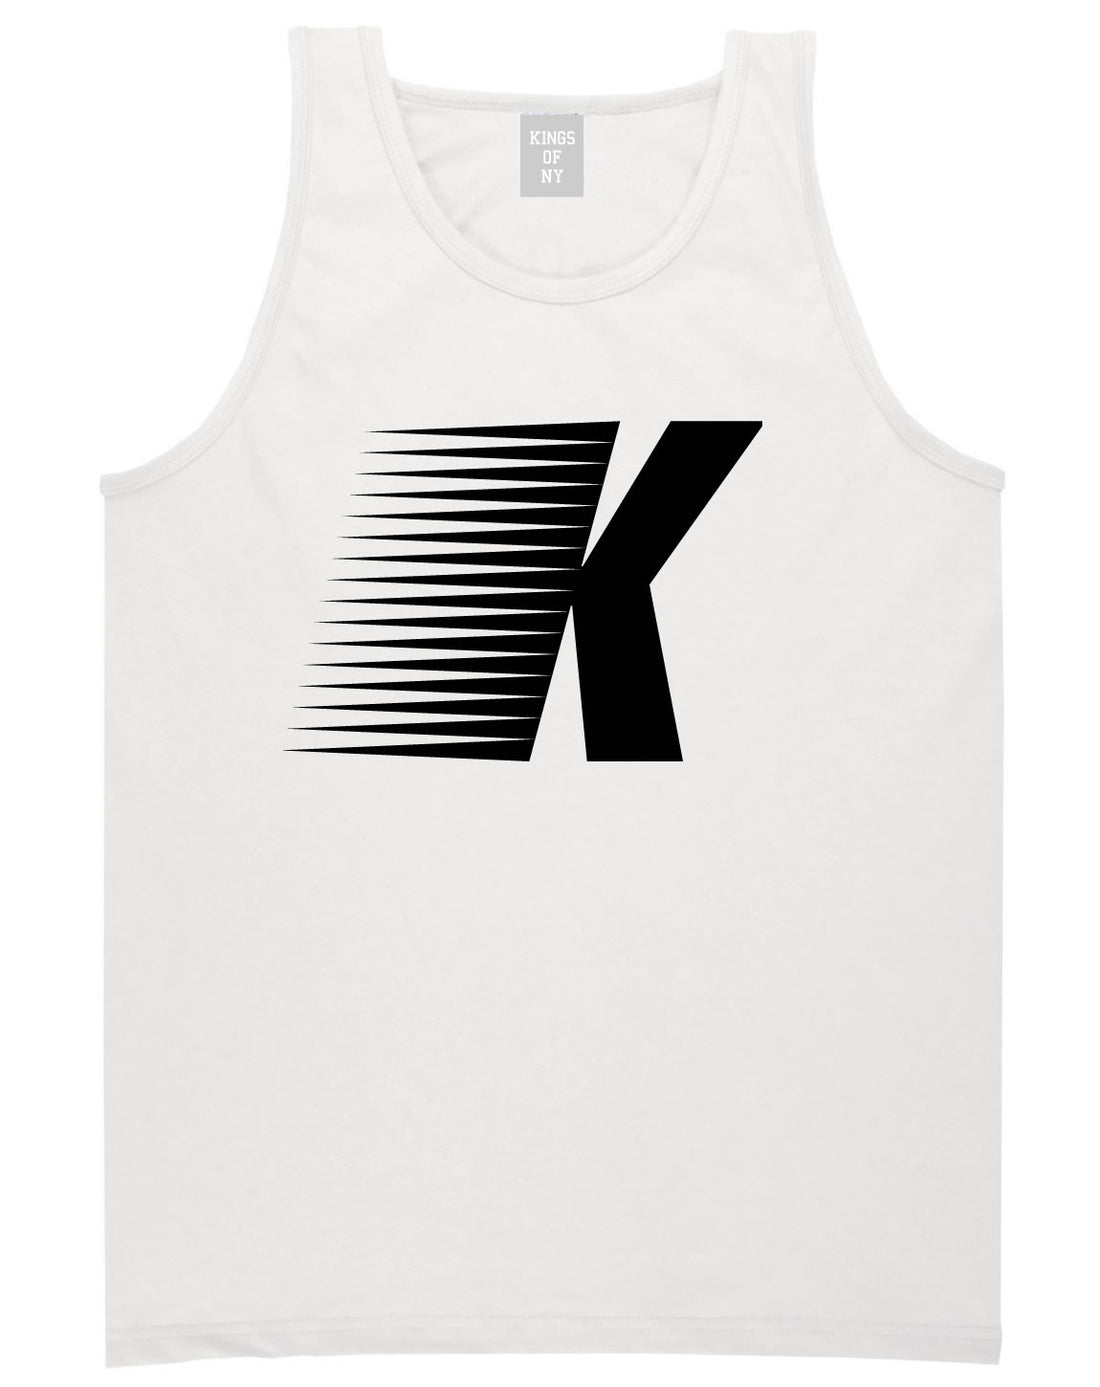 Flash K Running Fitness Style Tank Top in White By Kings Of NY